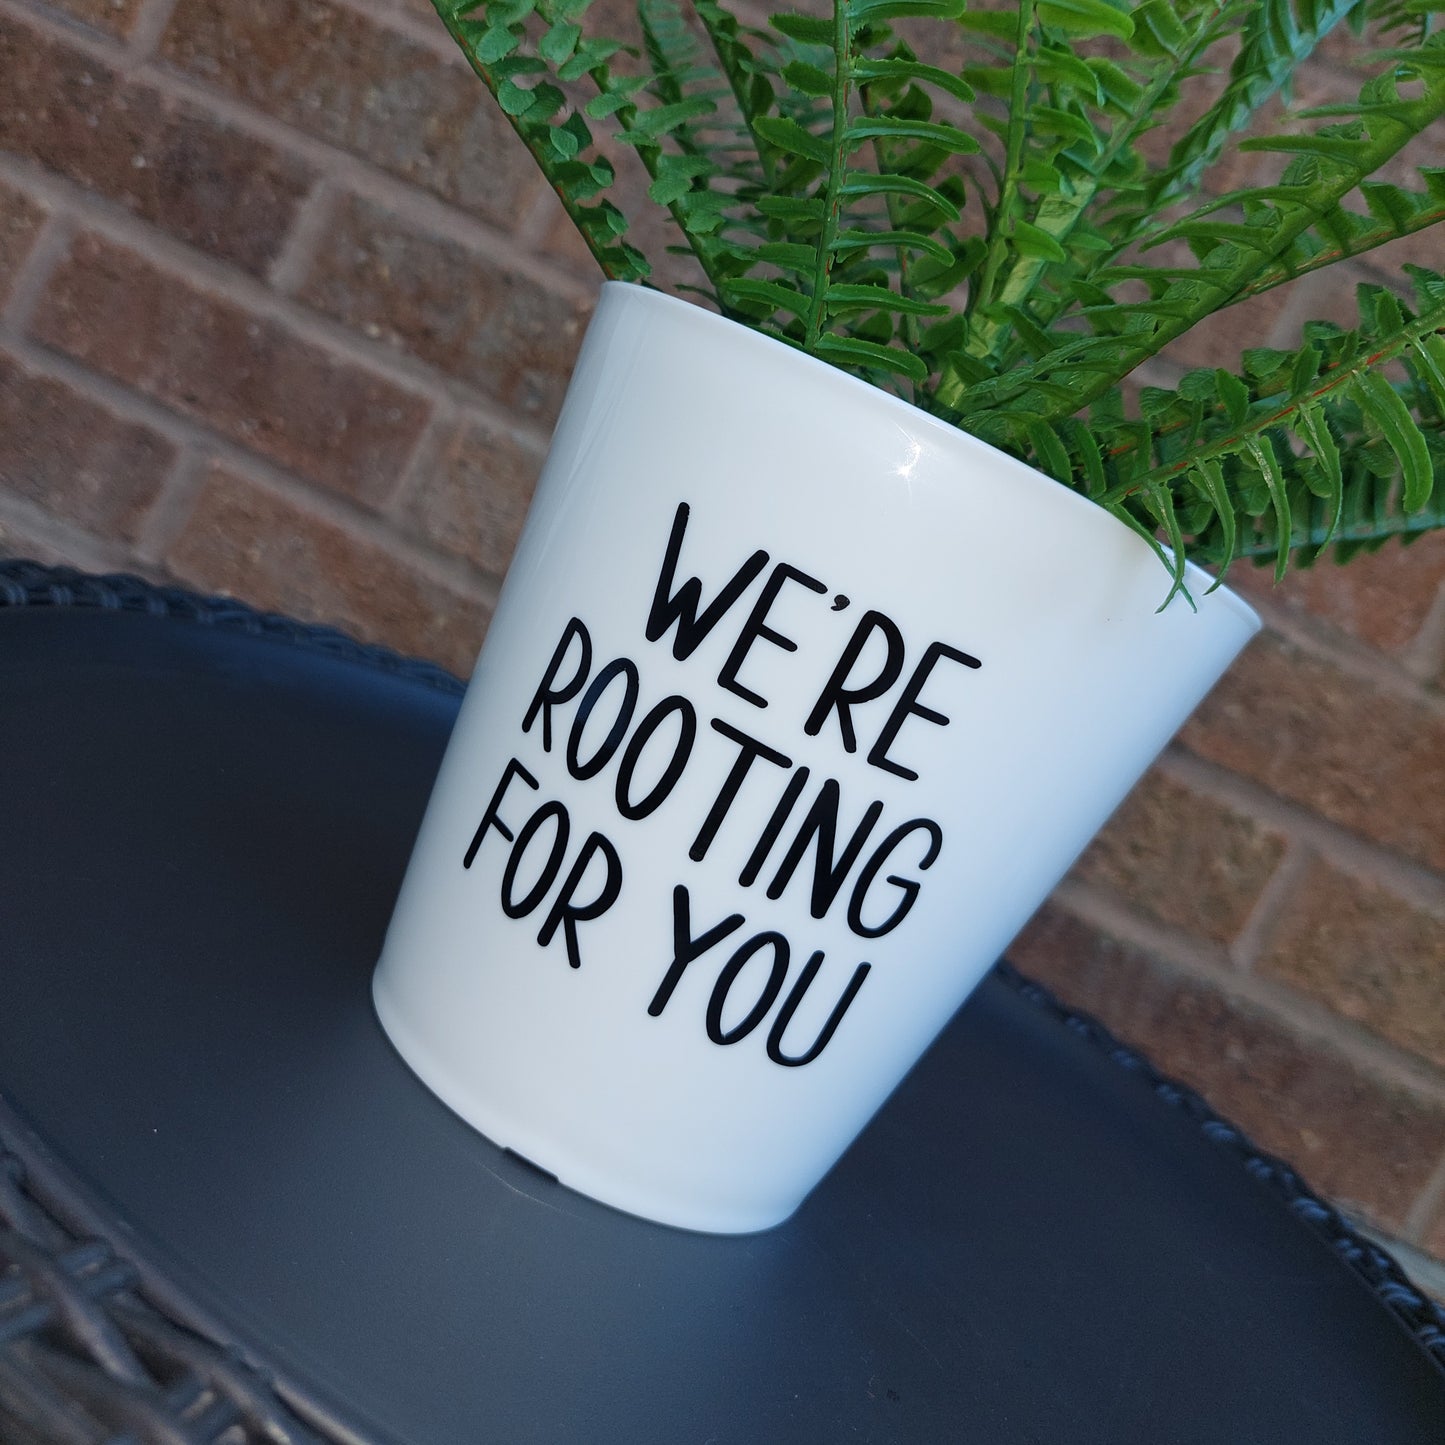 Plant Pot Sticker | We're Rooting For You | Funny Gift Idea | Sticker Decal